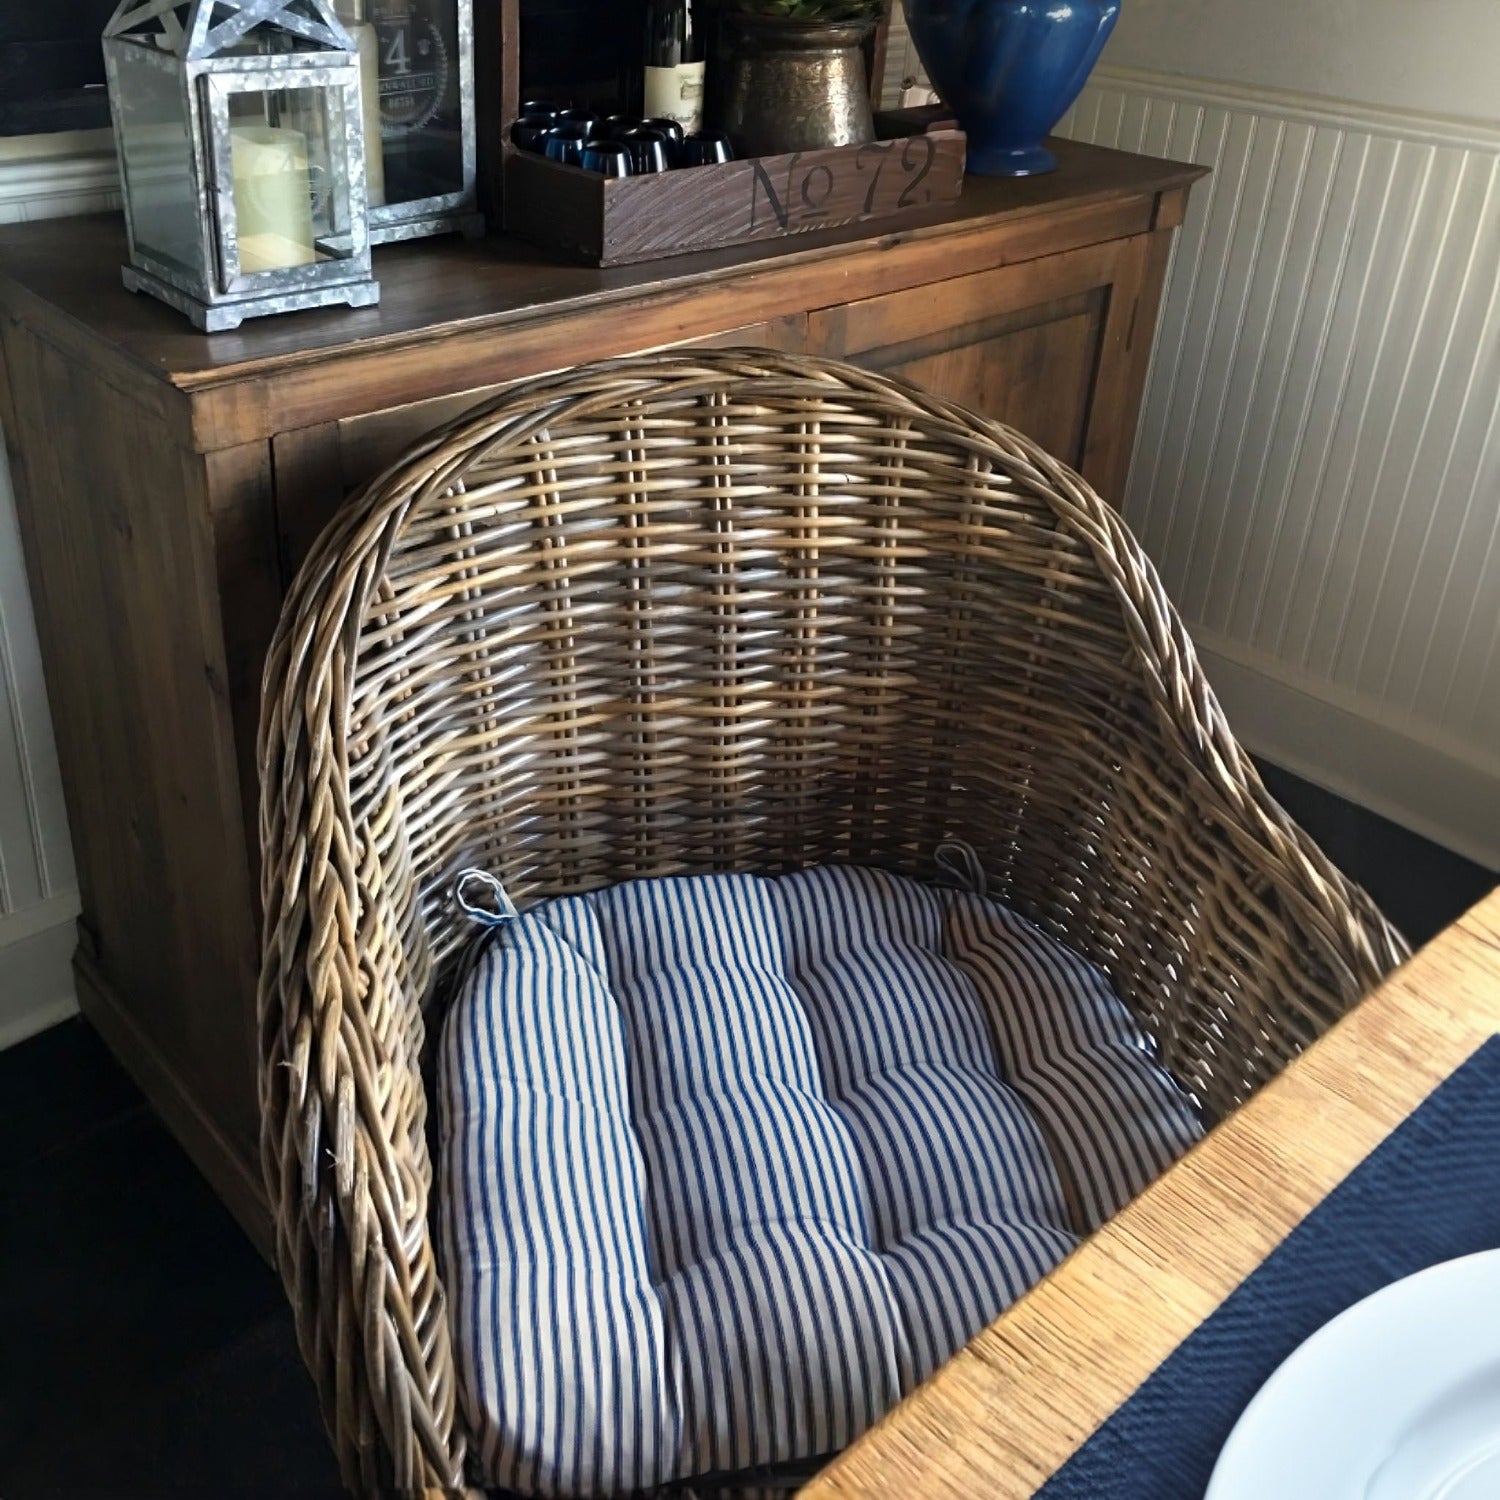 navy ticking stripe wicker chair cushions on a rattan chair in the dining room